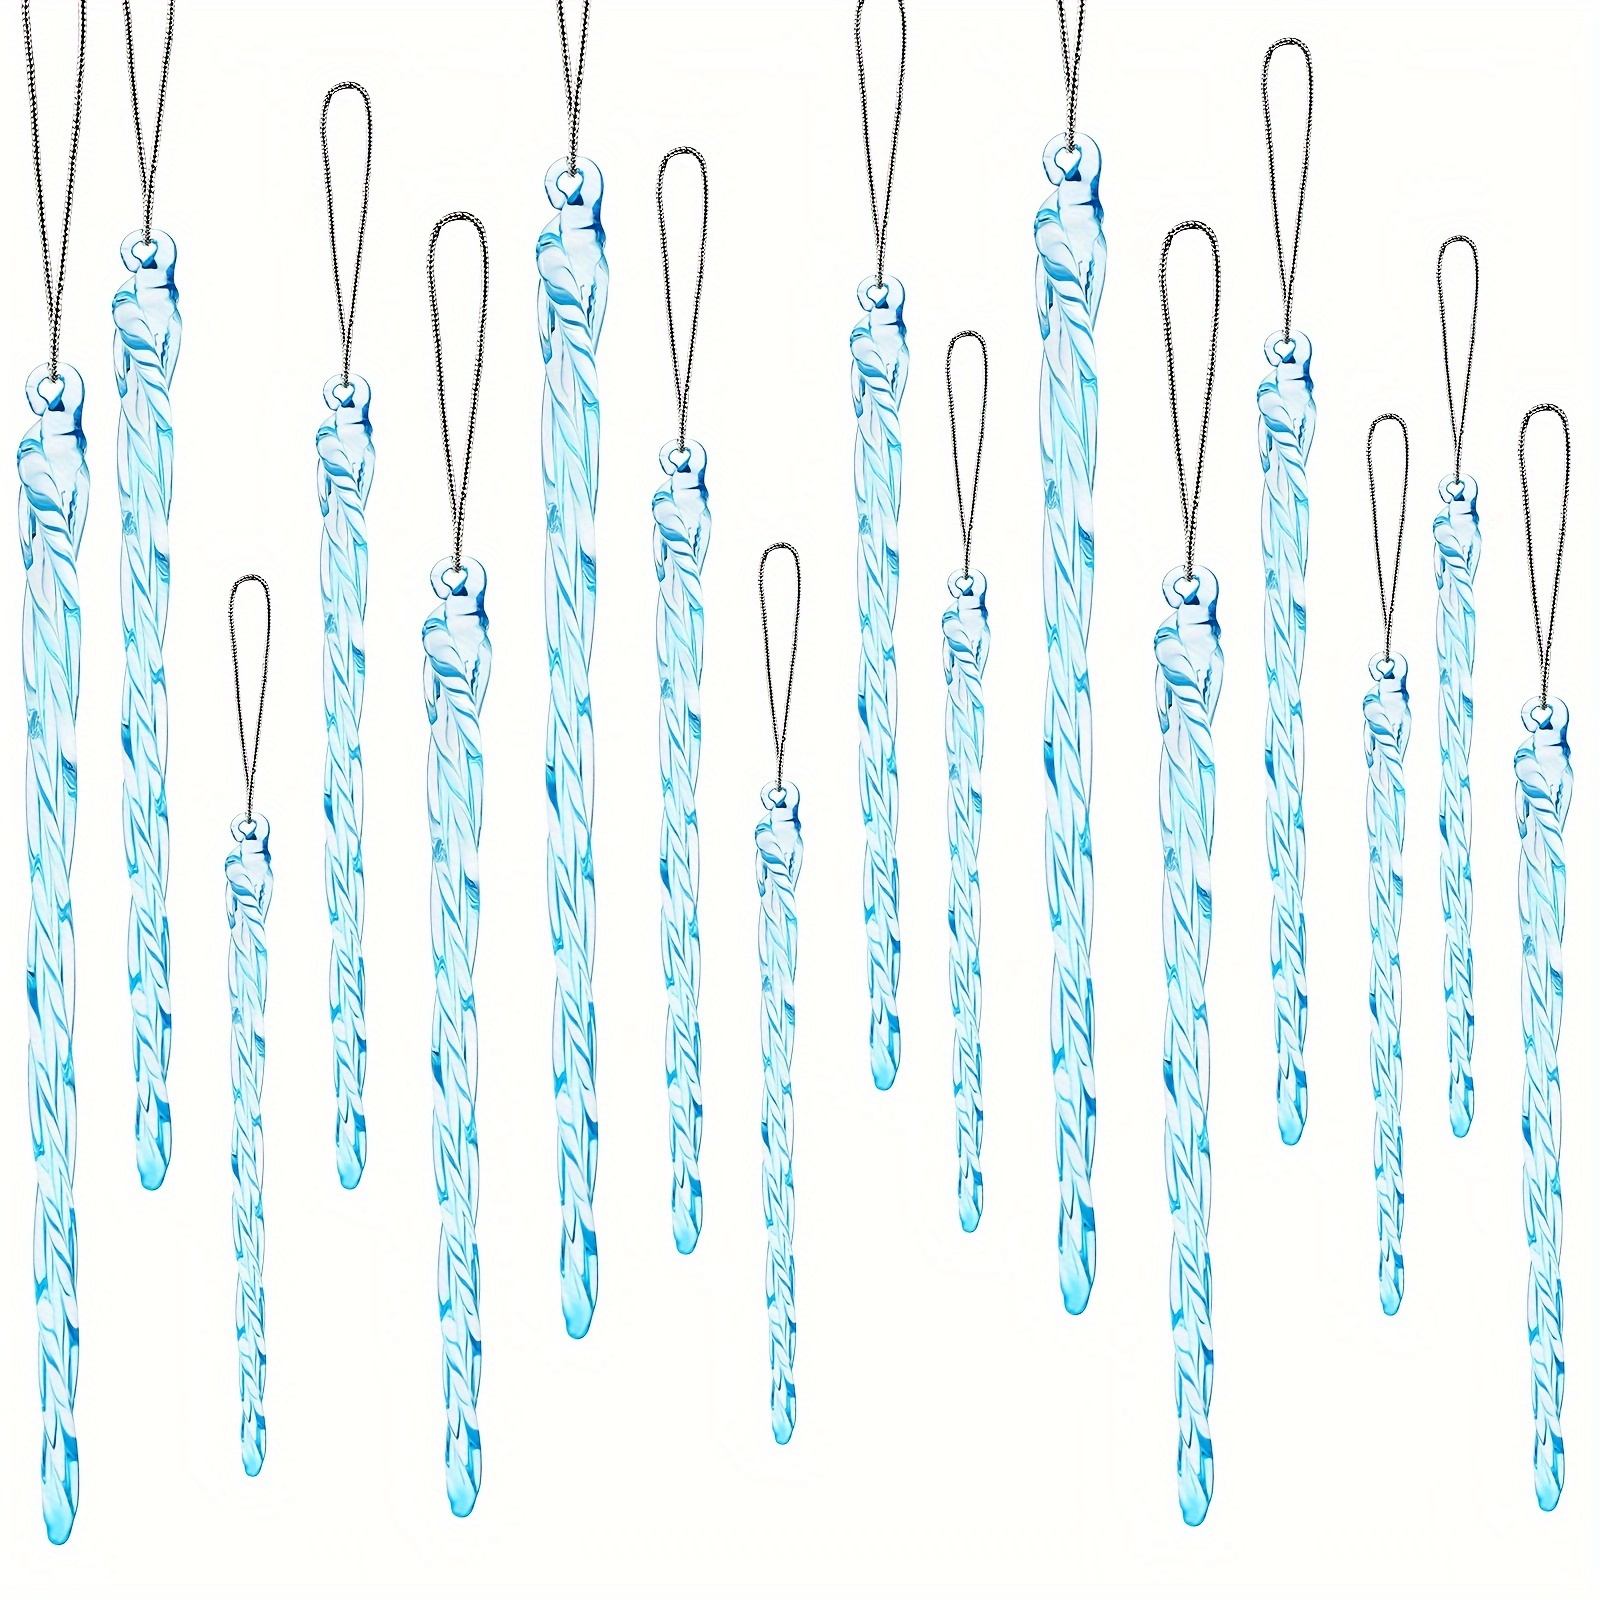 

Glass Icicle 3.5-7.8 Inch Twisted Glass Icicle Christmas Ornaments Icicle Decorations Hanging (light Blue, 54)